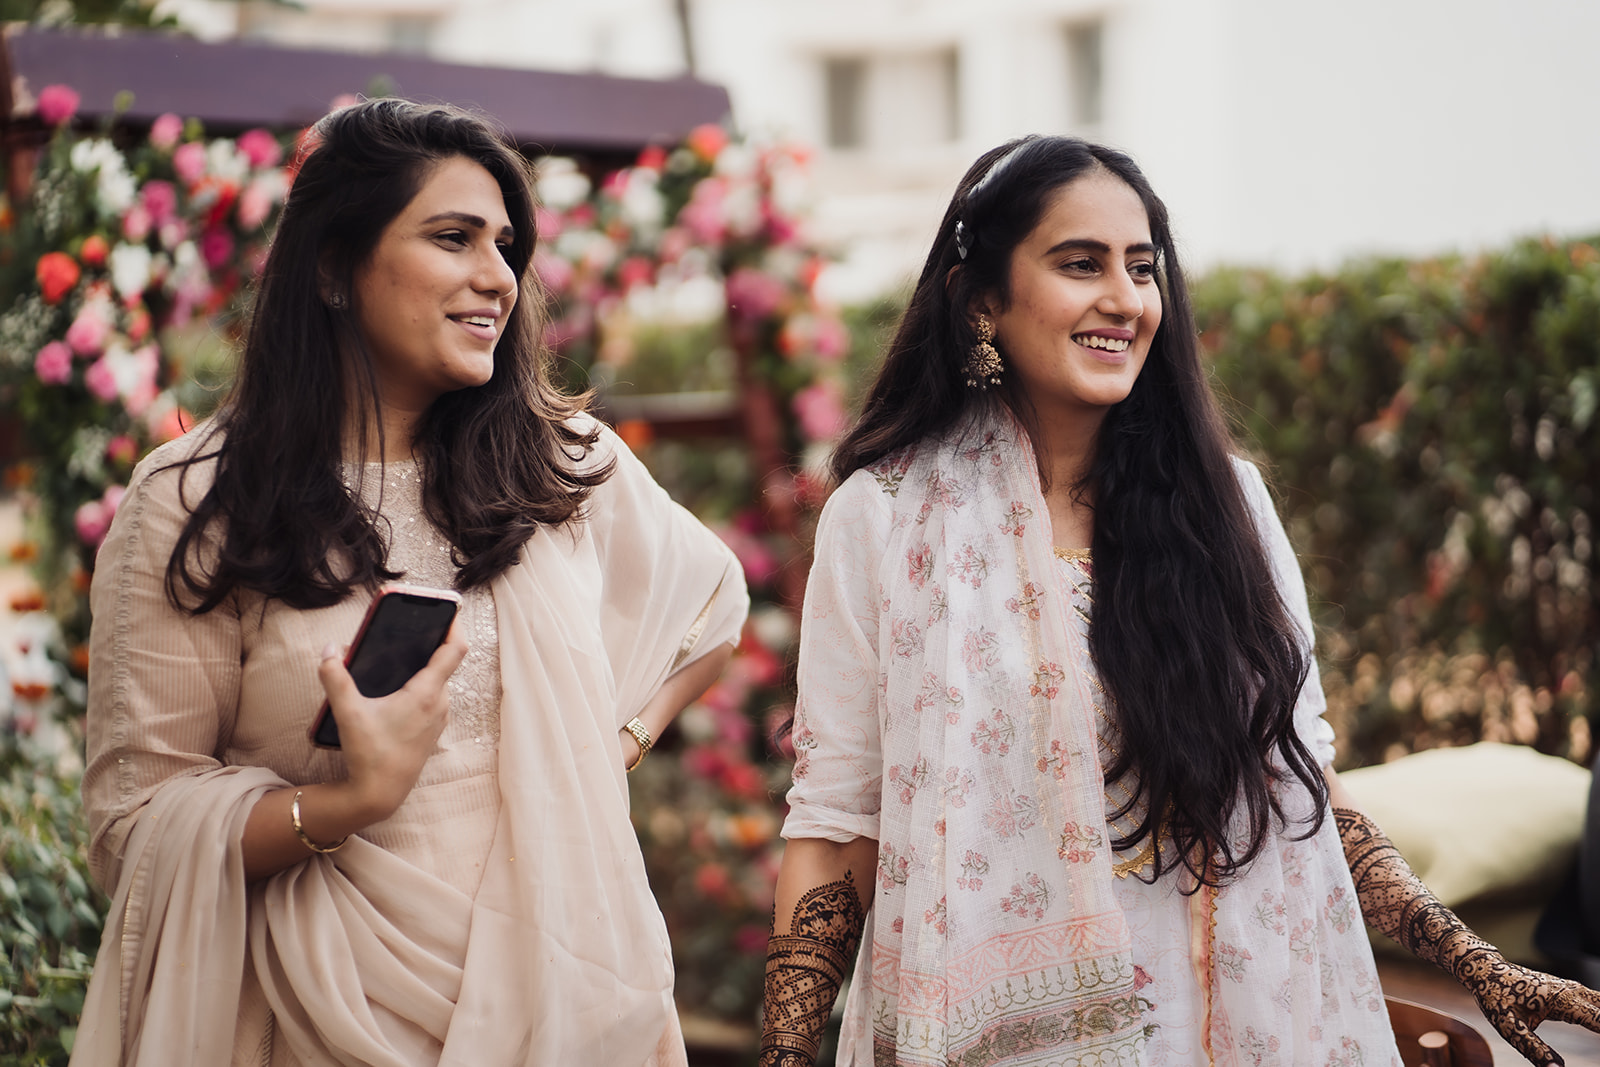 Family bond: The bride shares a heartwarming moment with her loved ones in this beautiful image